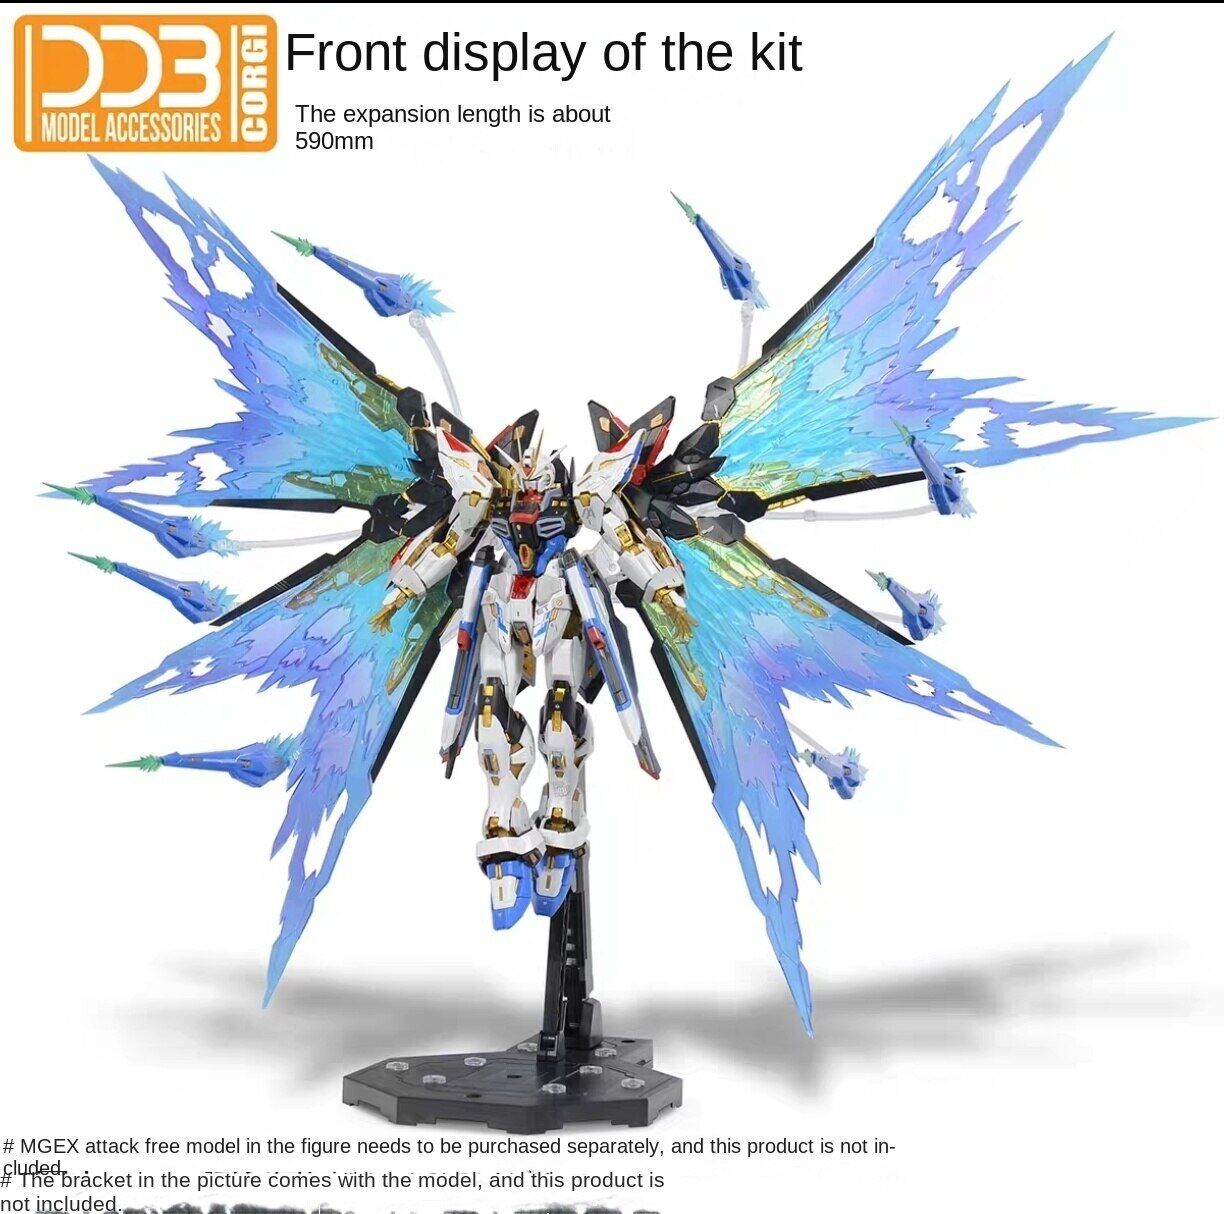 DDB model fluorescence light wing effect for ZGMF-X20A MGEX 1/100 Strike Freedom